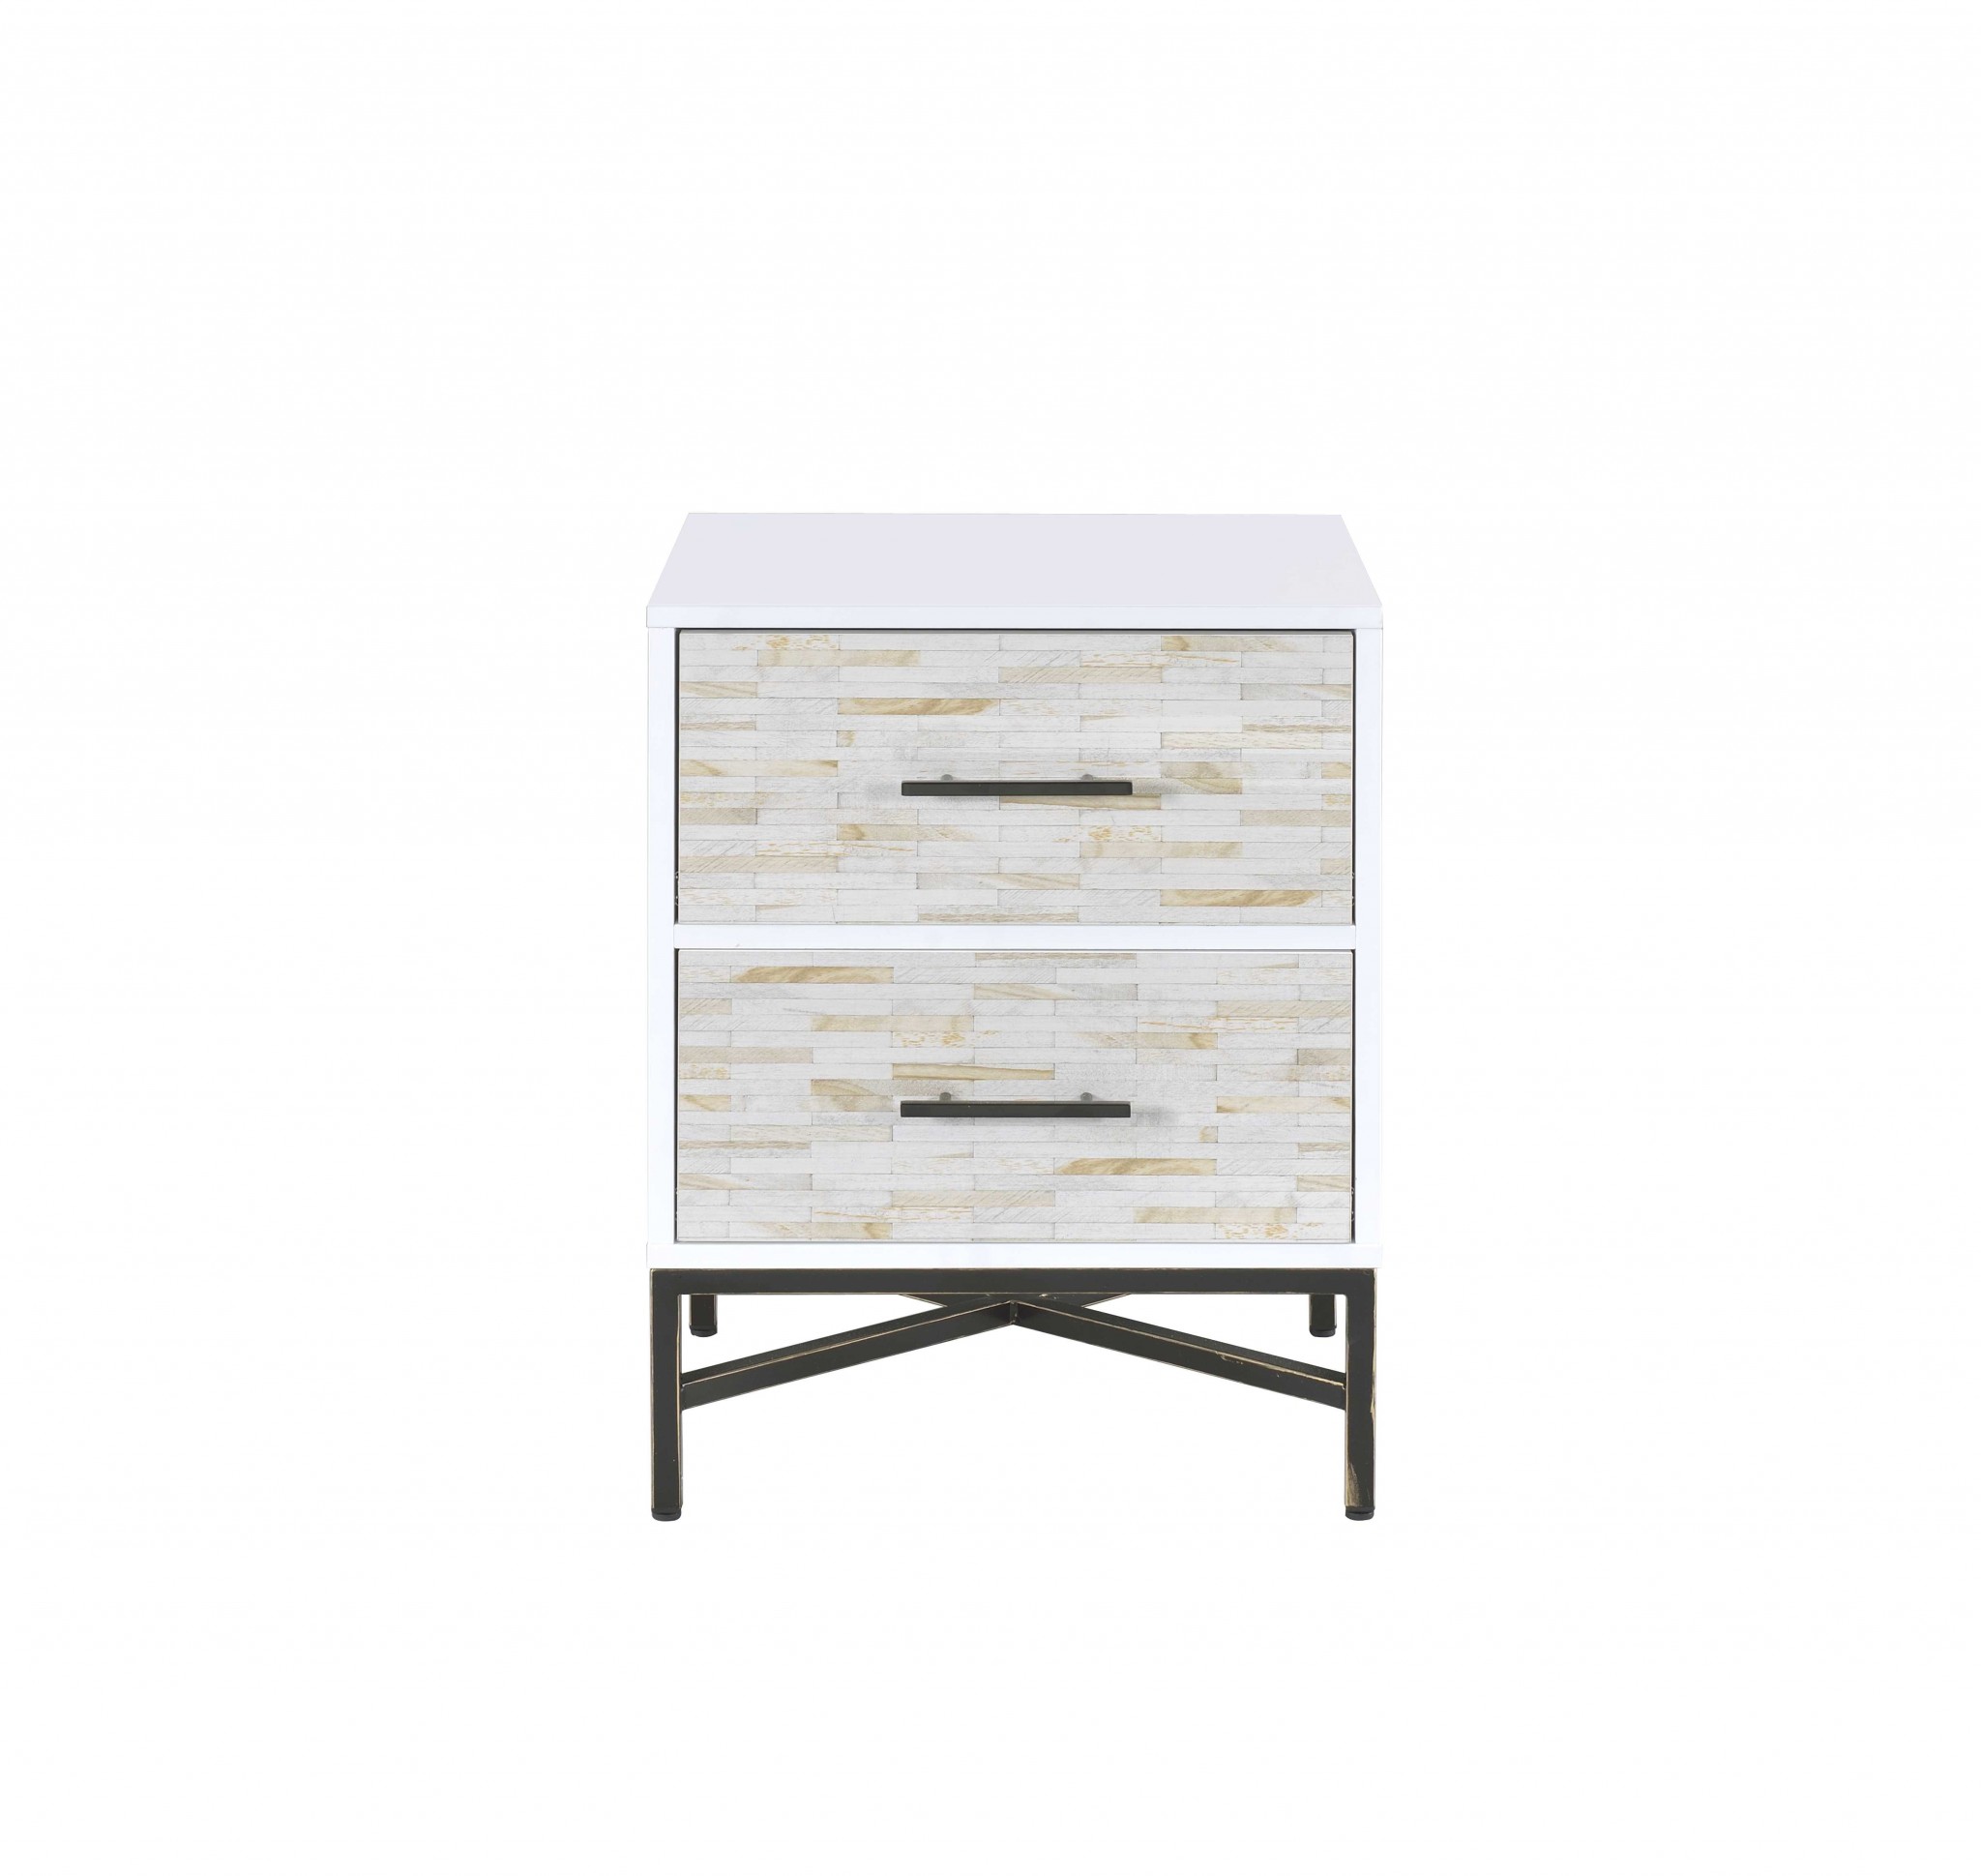 20" X 18" X 26" White And Black Wooden Nightstand